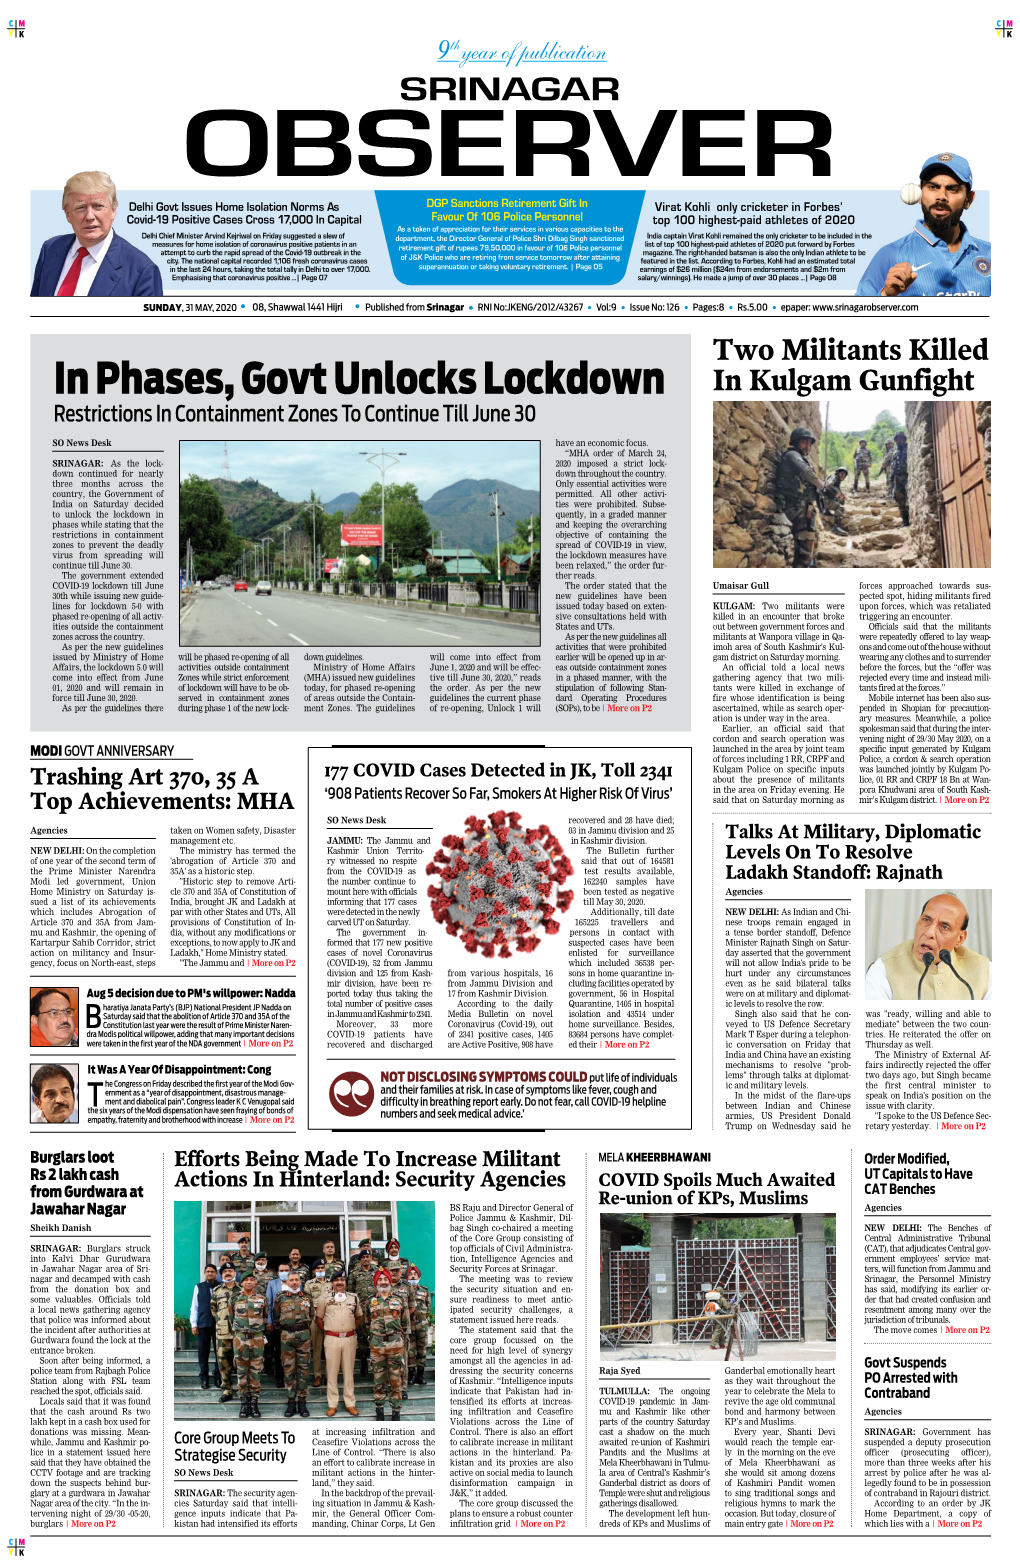 In Phases, Govt Unlocks Lockdown in Kulgam Gunfight Restrictions in Containment Zones to Continue Till June 30